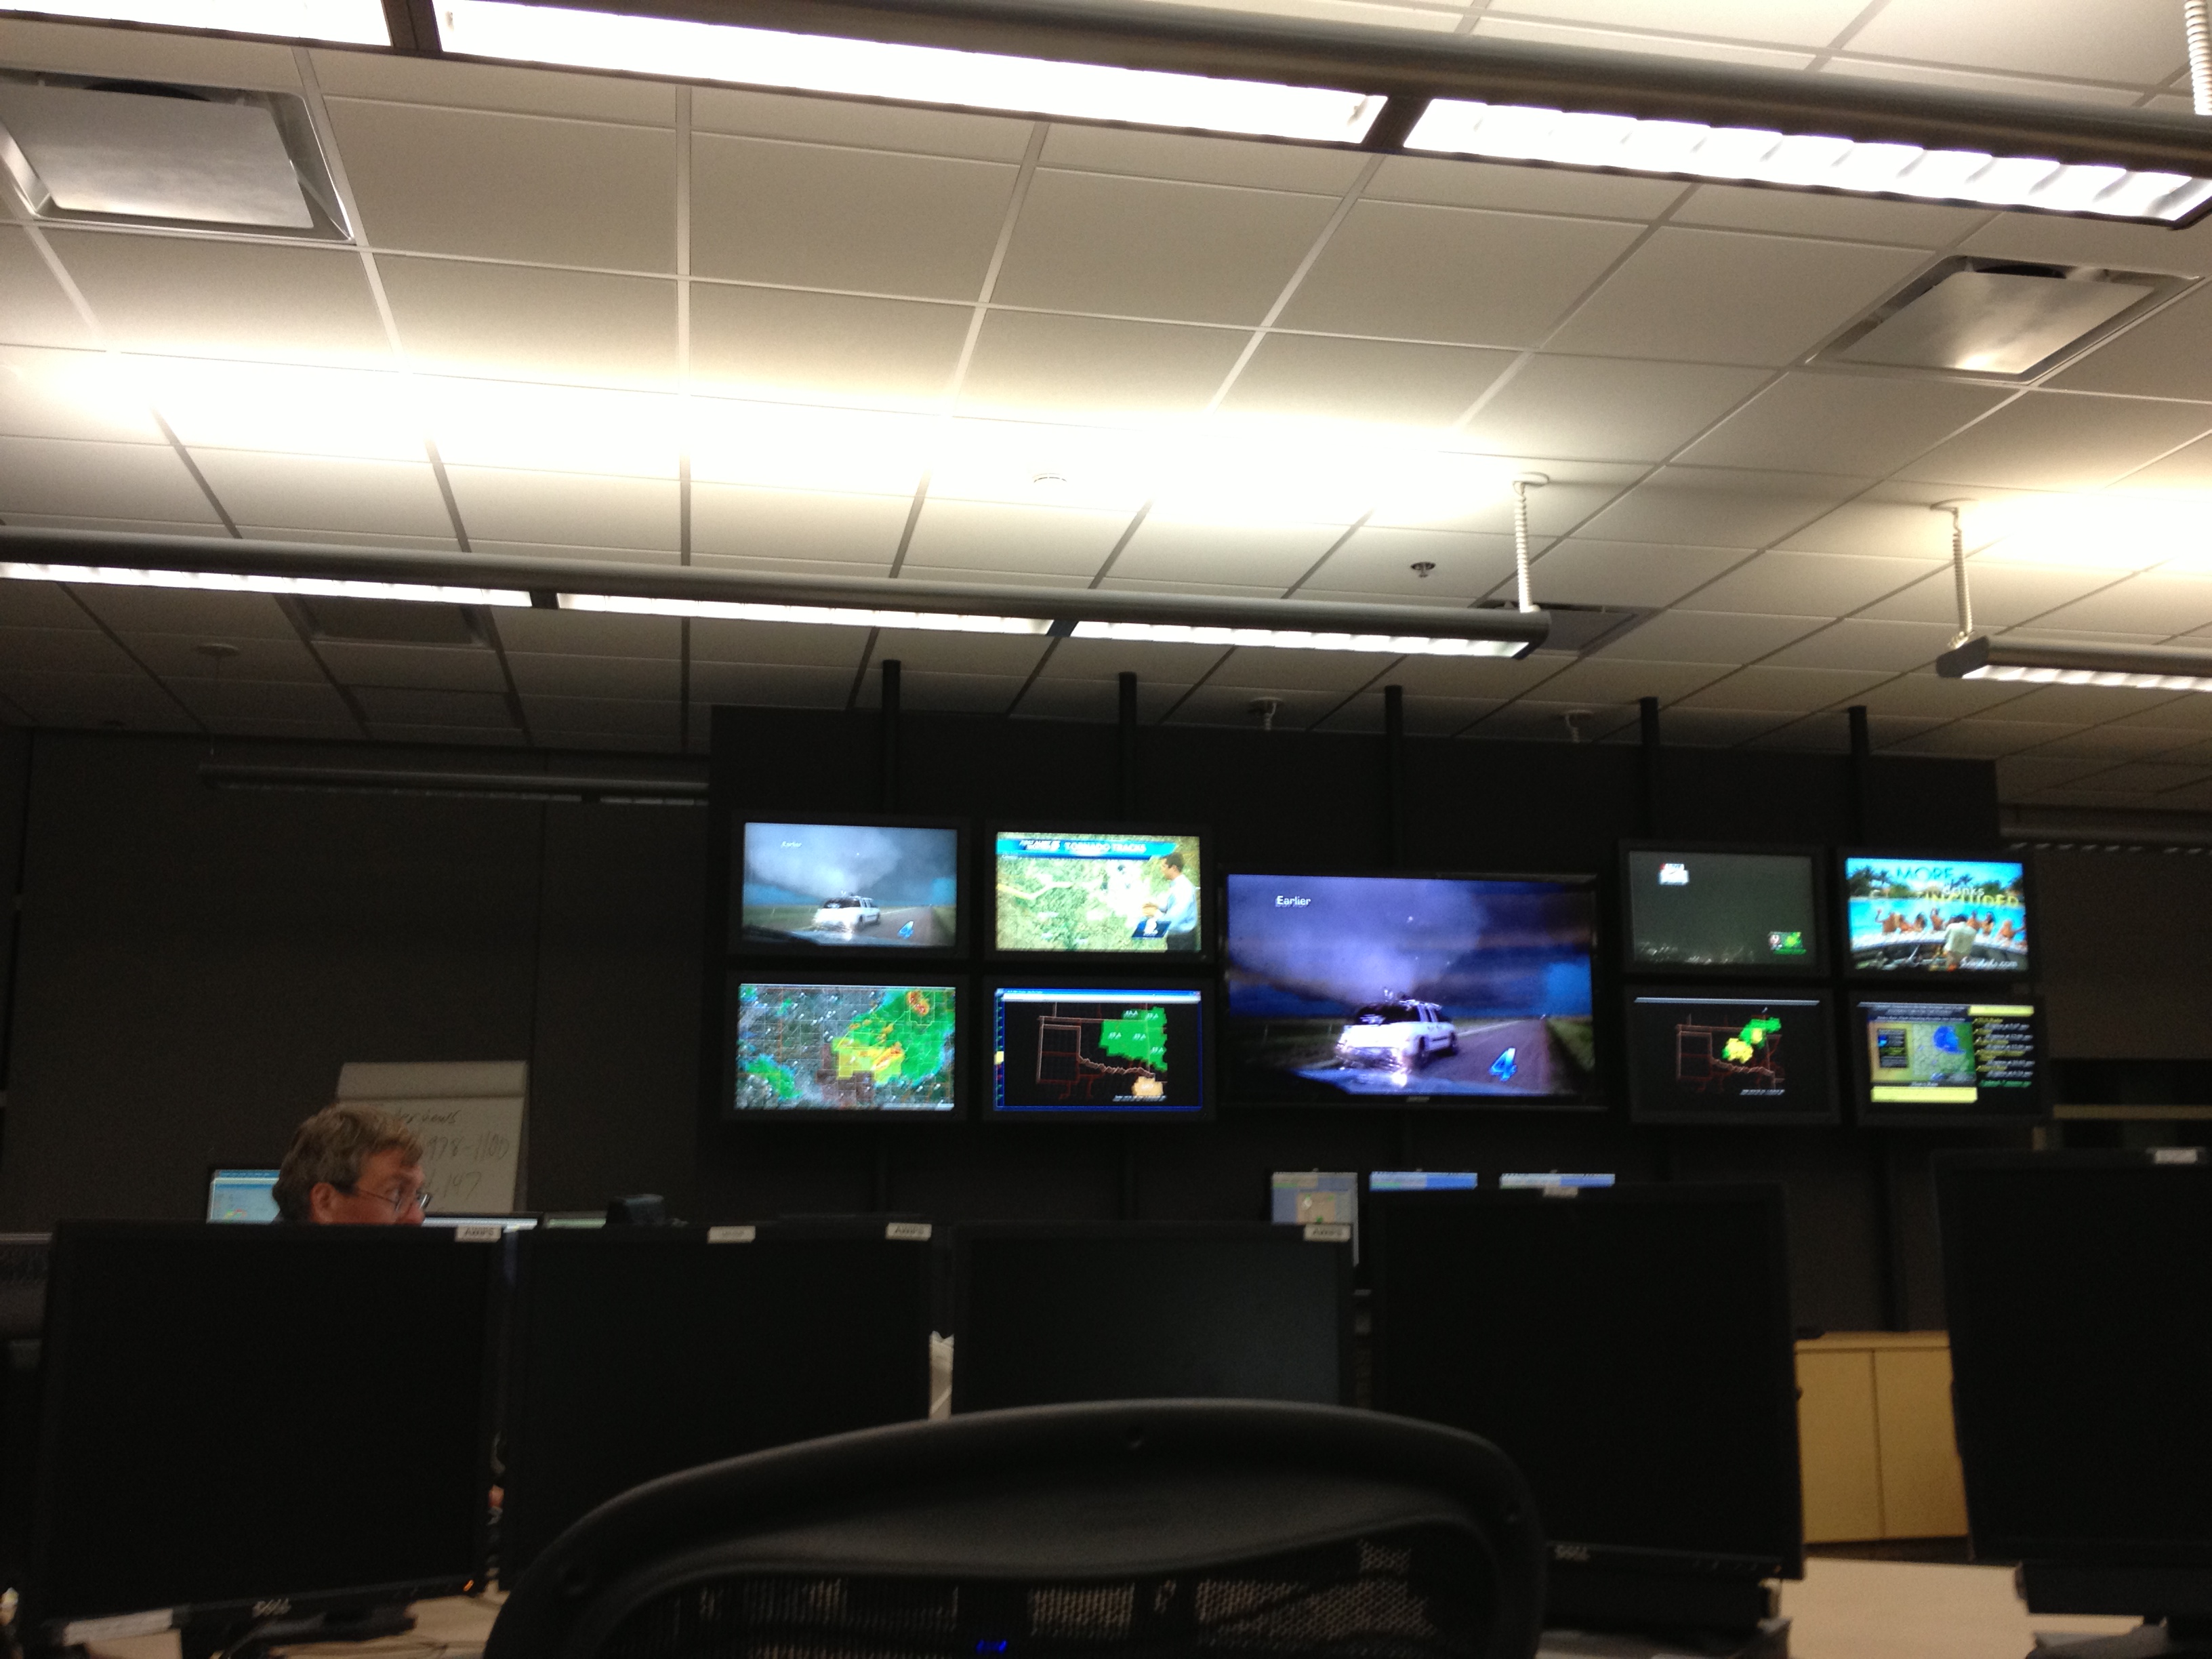 NWS Norman Operations Photos During the May 31-June 1, 2013 Severe Weather/Flooding Event